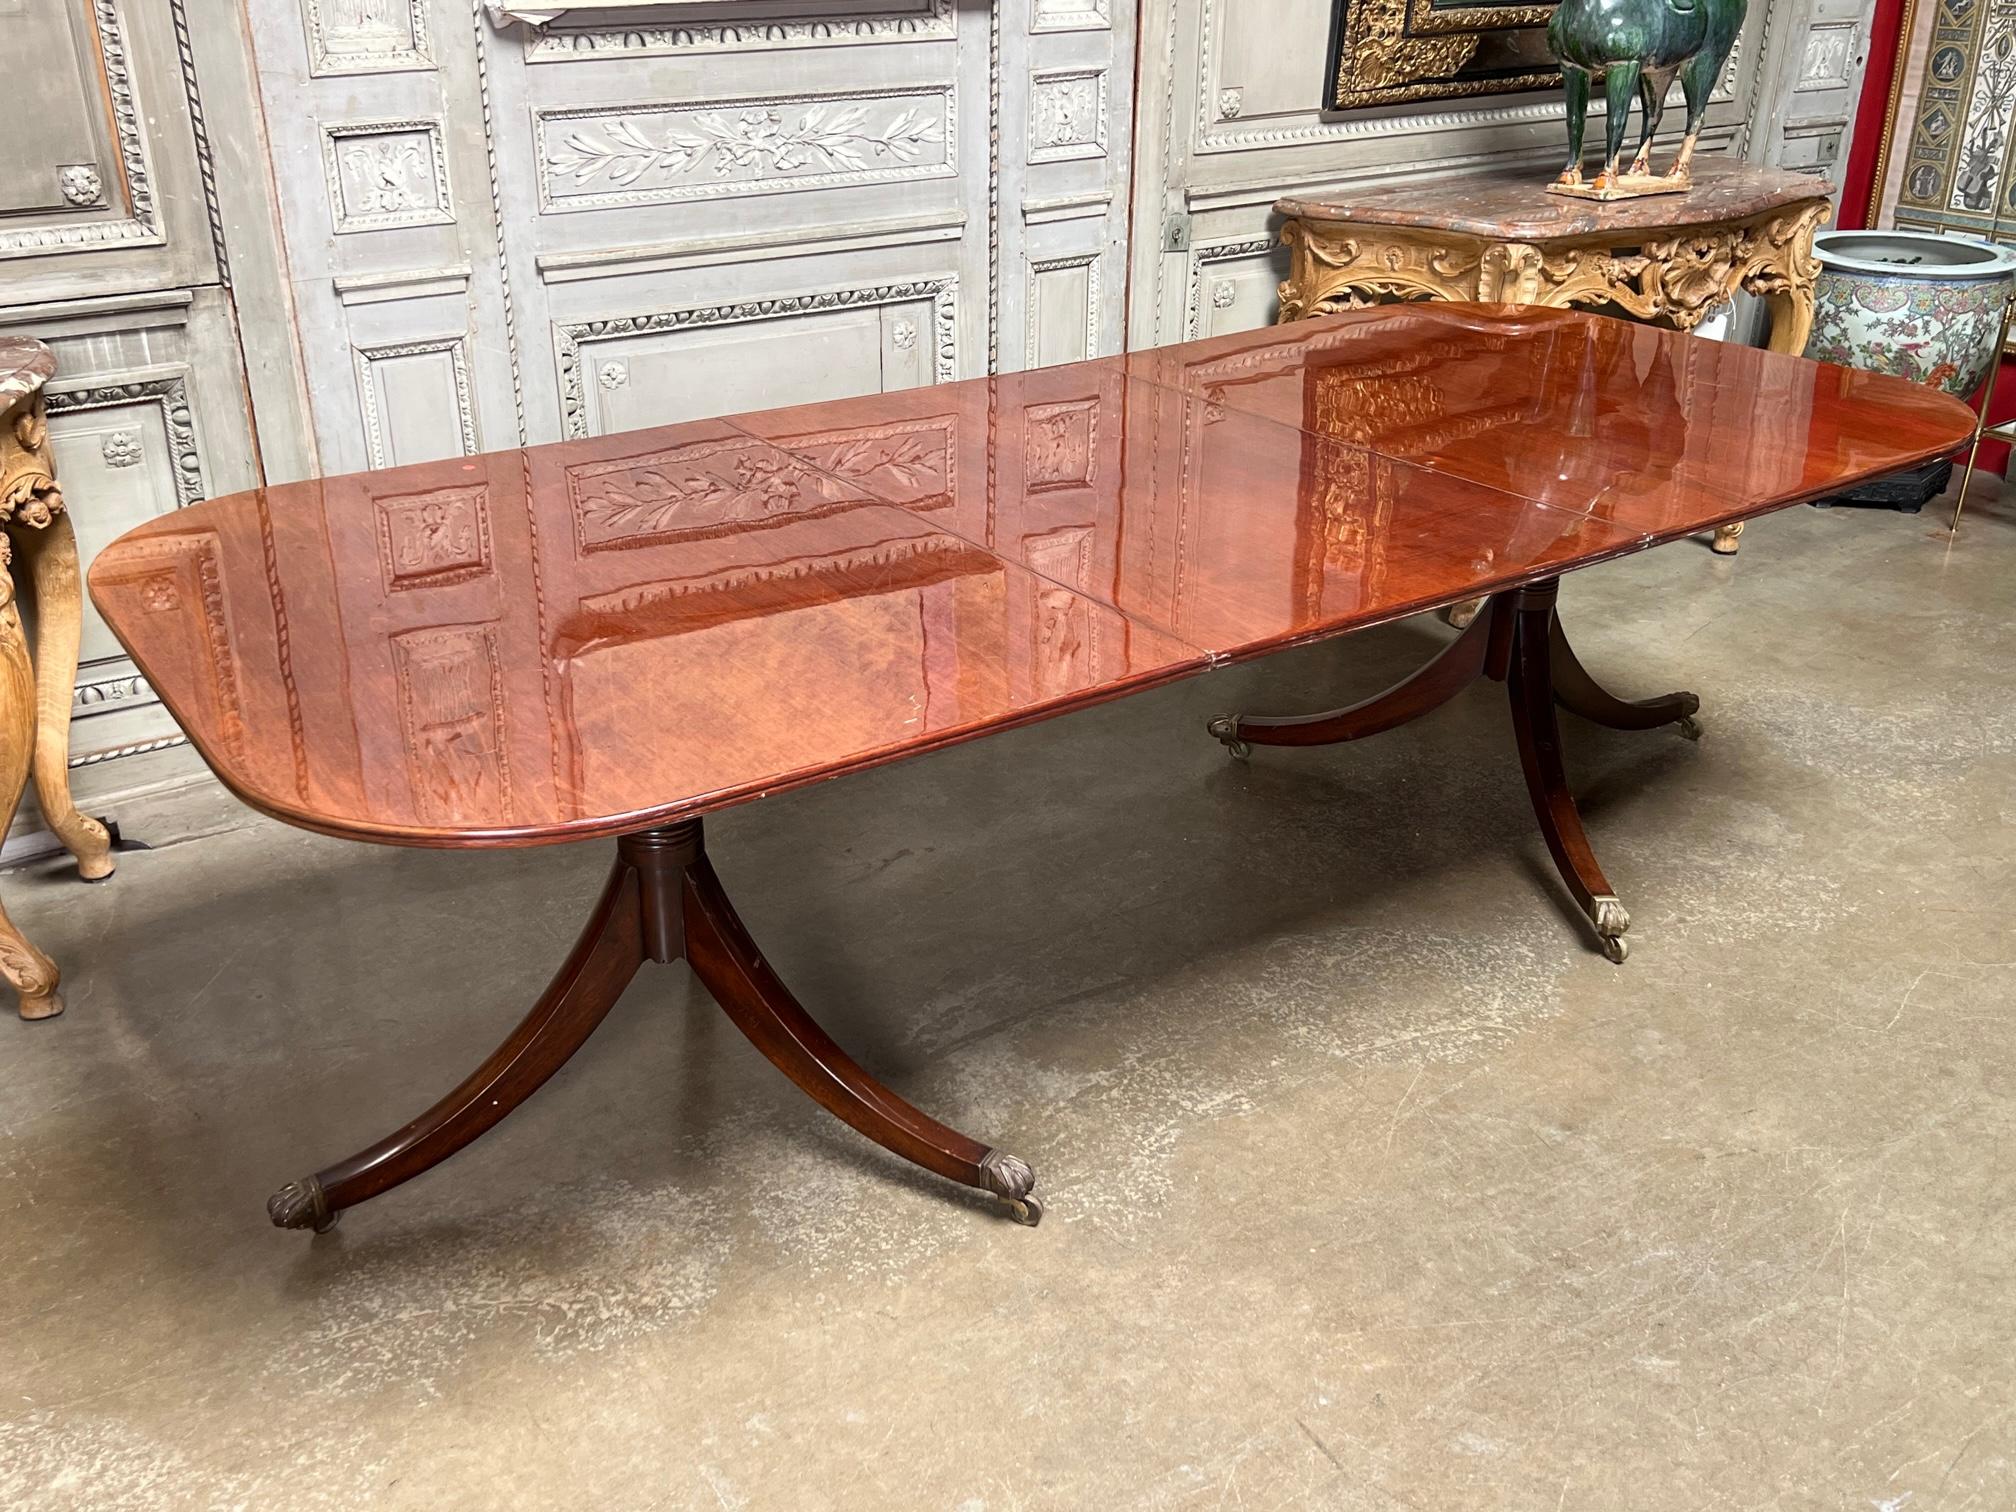 A very nice English George III style double pedestal mahogany dining table with one large leaf. It is constructed in very nice timber and and dates from early to mid 20th century. The width without the leaf is 72.50